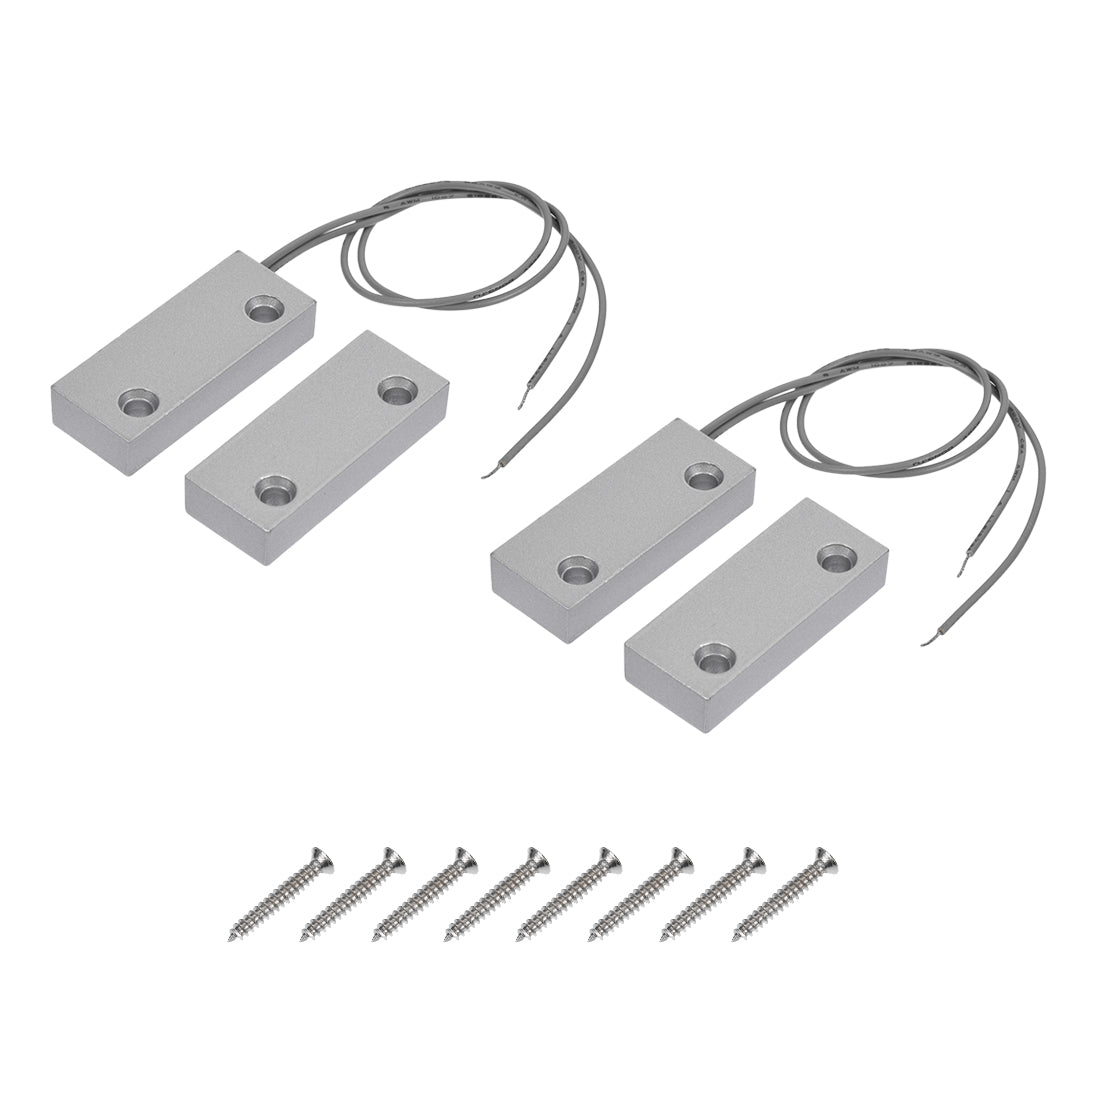 uxcell Uxcell MC-52 NC Rolling Gate Door Contact Magnetic Reed Switch 2Set